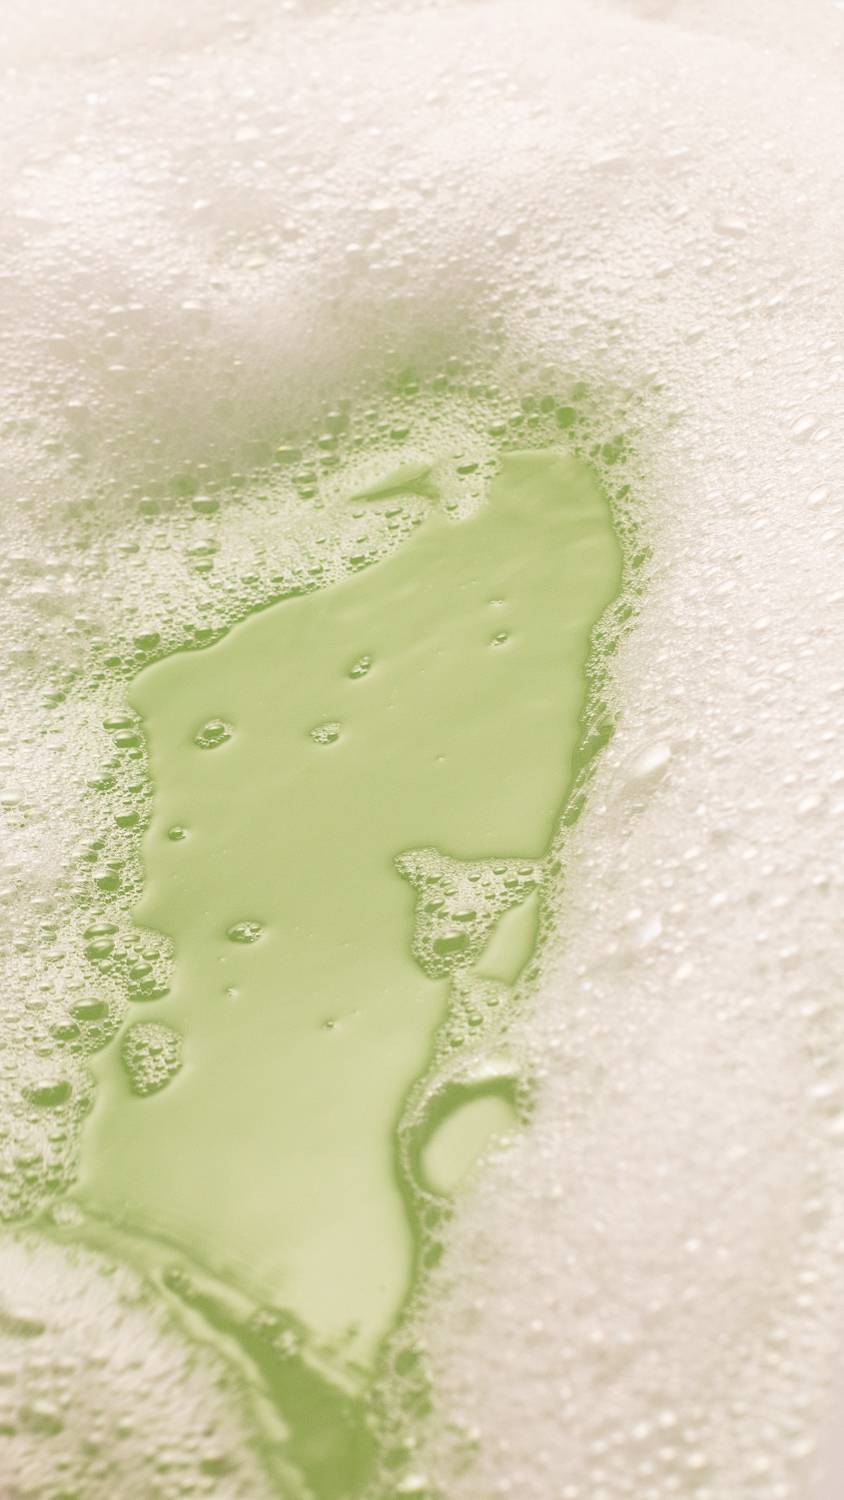 Image shows a thick blanket of bubbles with a hint of shimmery green water below.